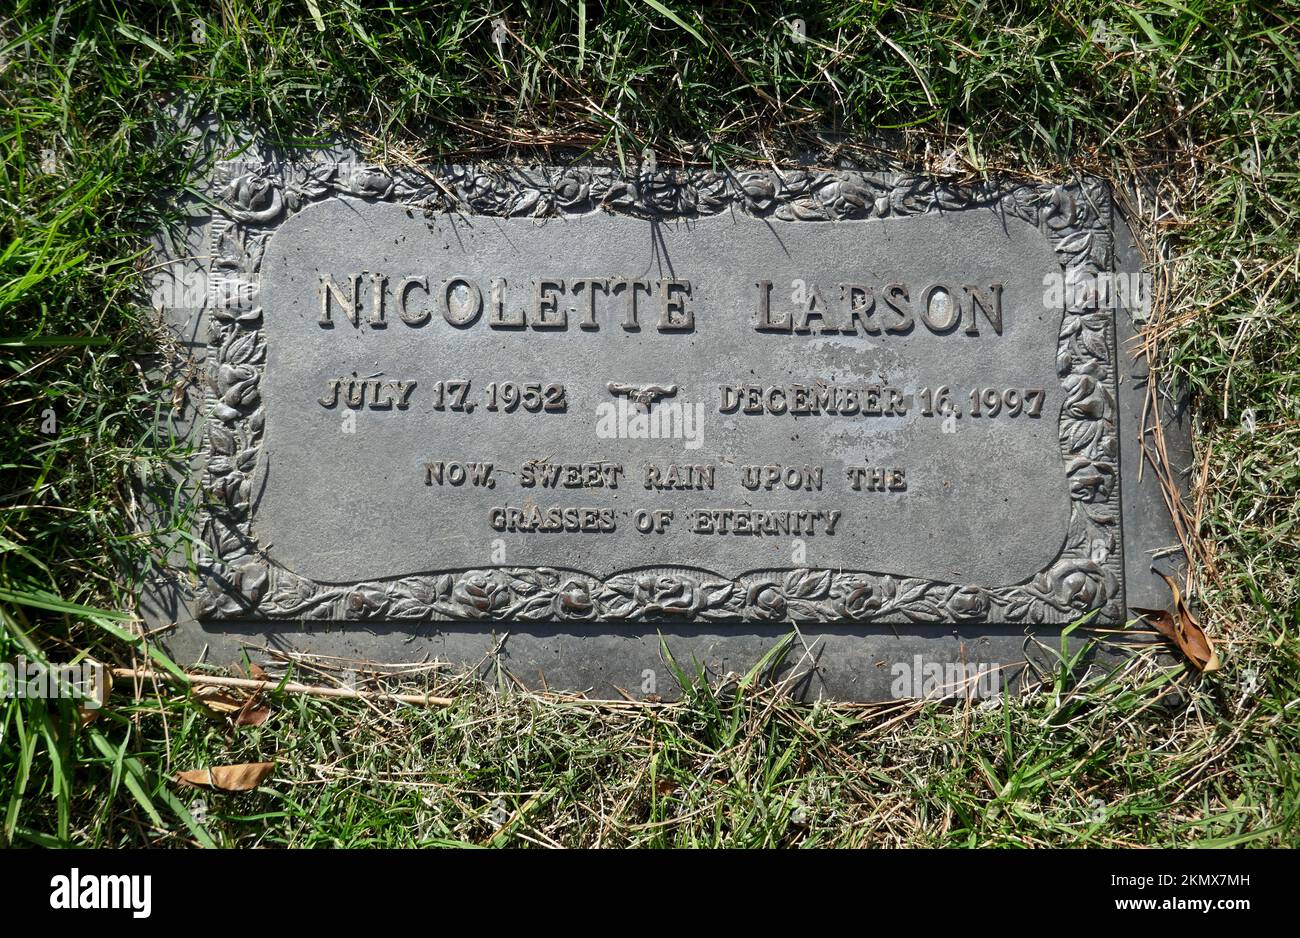 Los Angeles, California, USA 25th November 2022 Singer Nicolette Larson's Grave in Murmuring Trees Section at Forest Lawn Memorial Park Hollywood Hills on November 25, 2022 in Los Angeles, California, USA. Photo by Barry King/Alamy Stock Photo Stock Photo